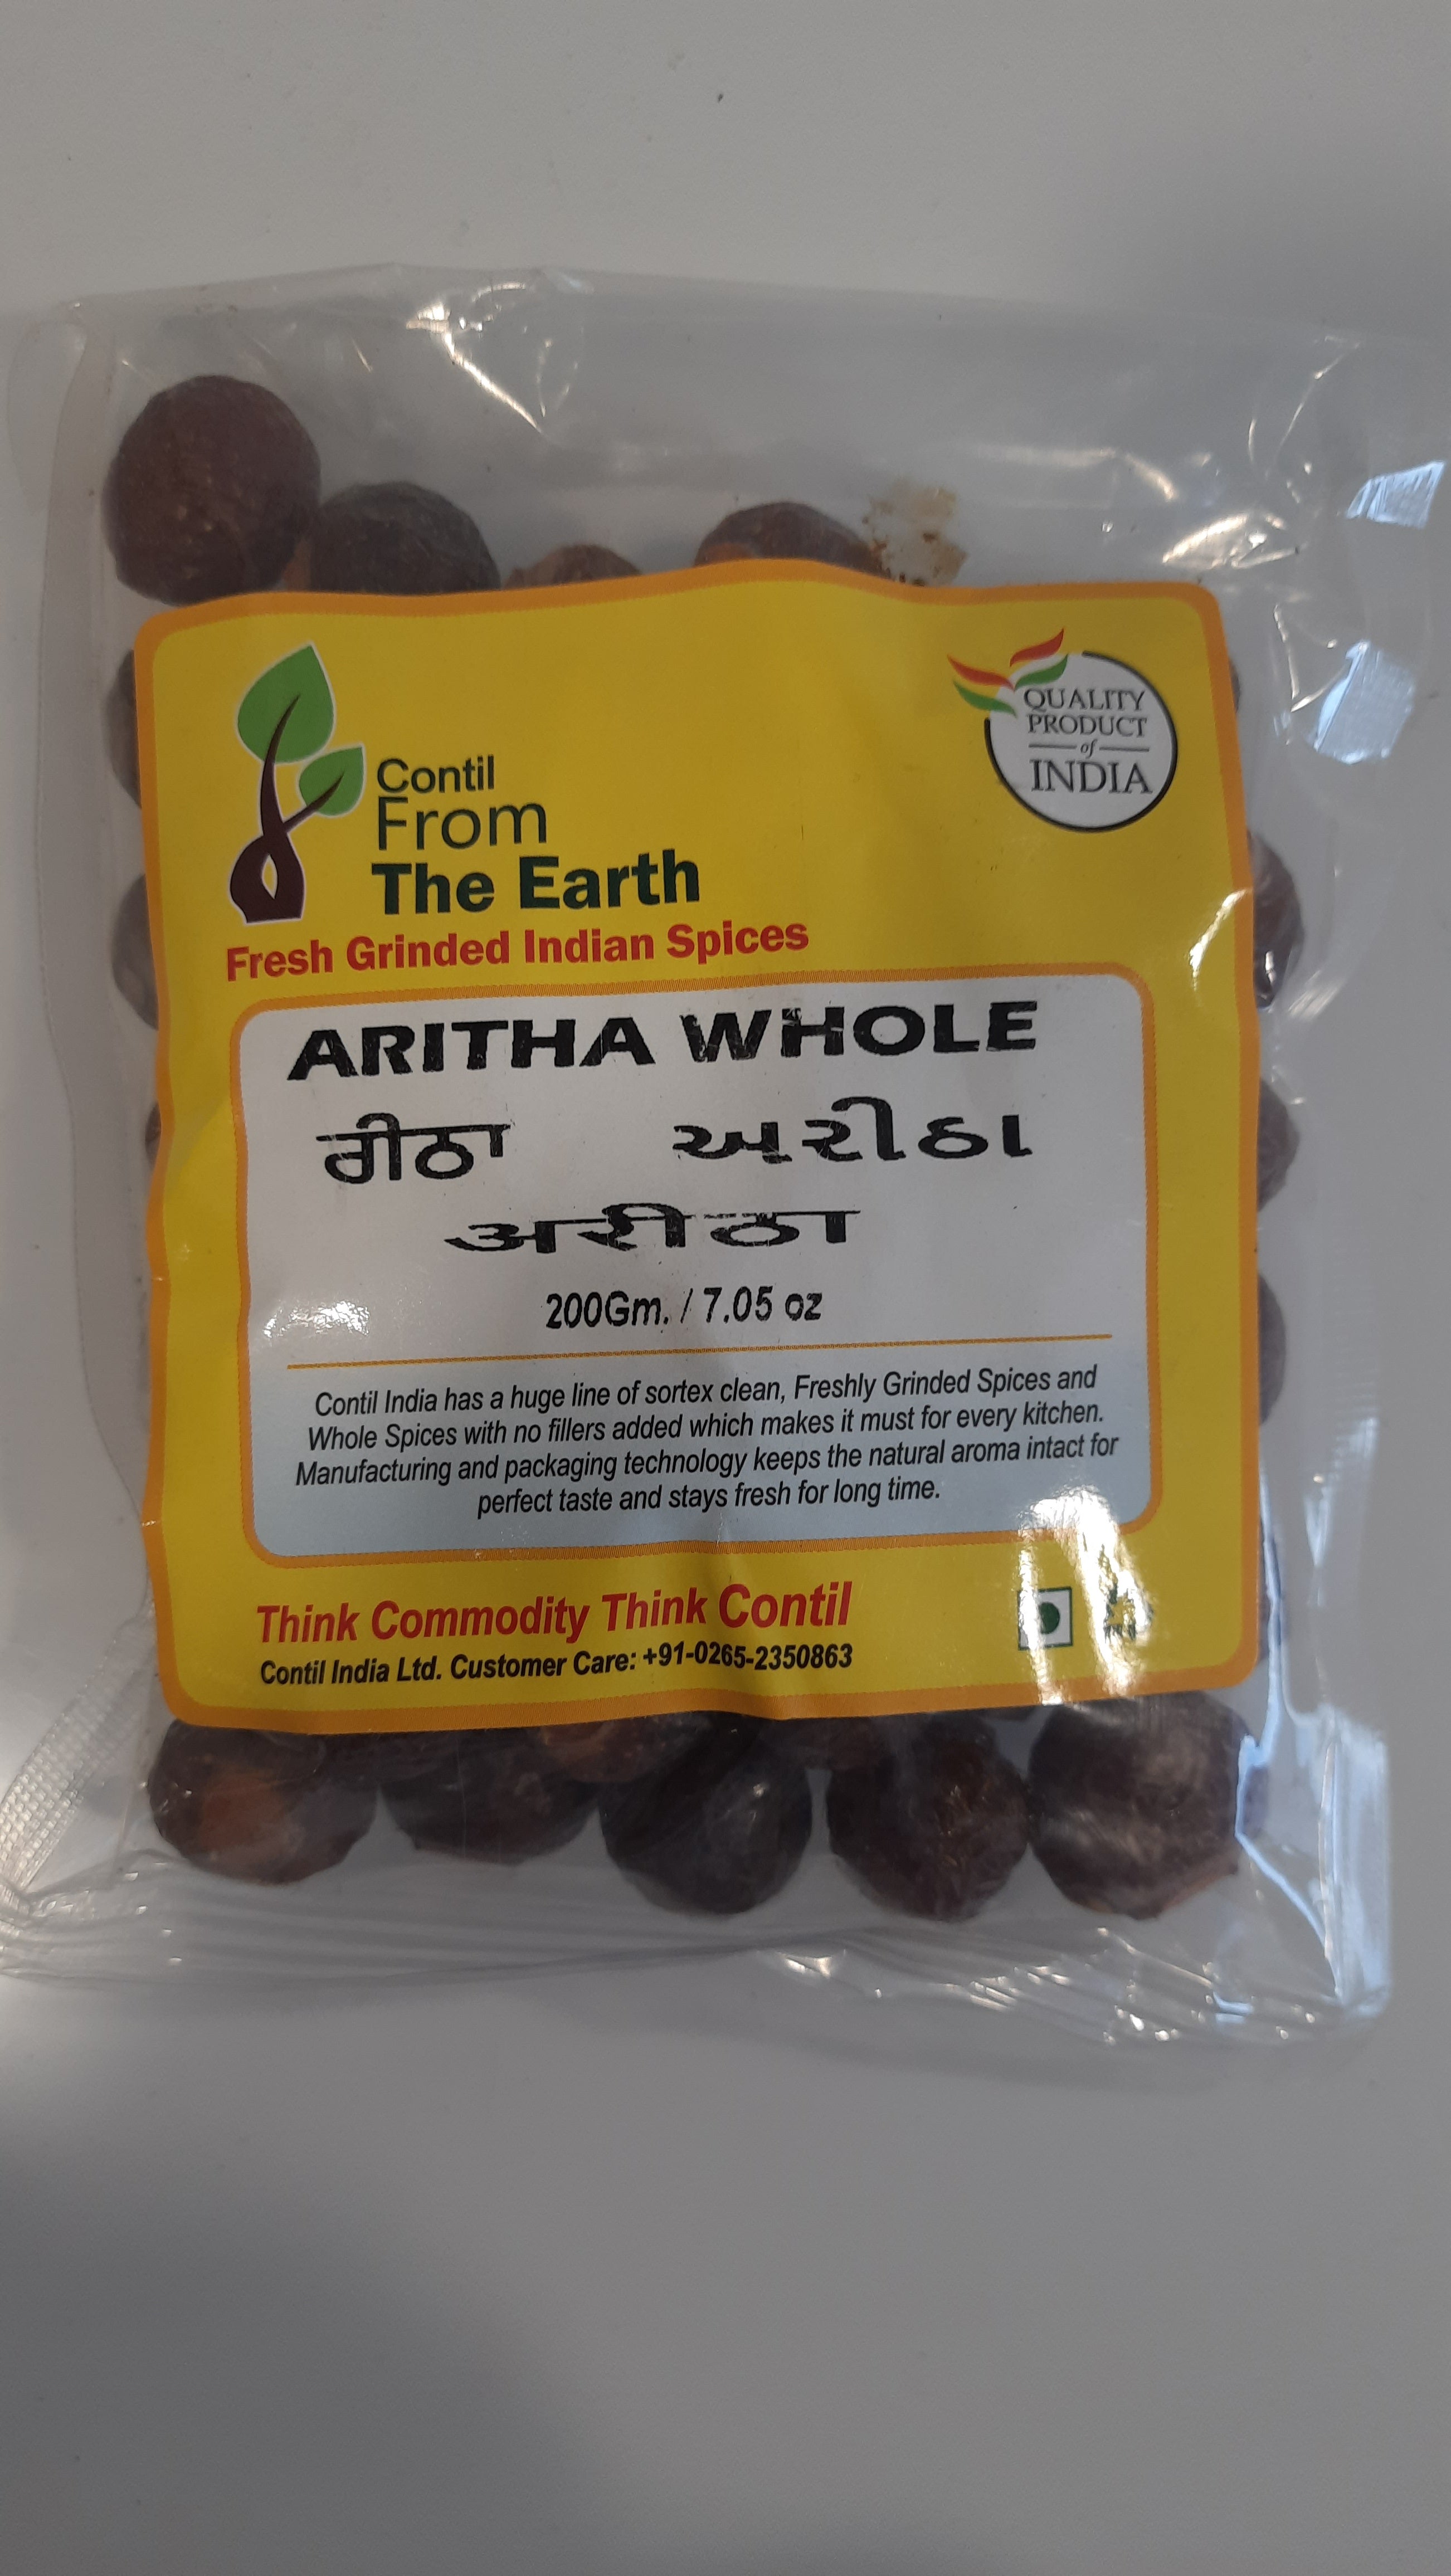 From the Earth - Aritha Whole 200g